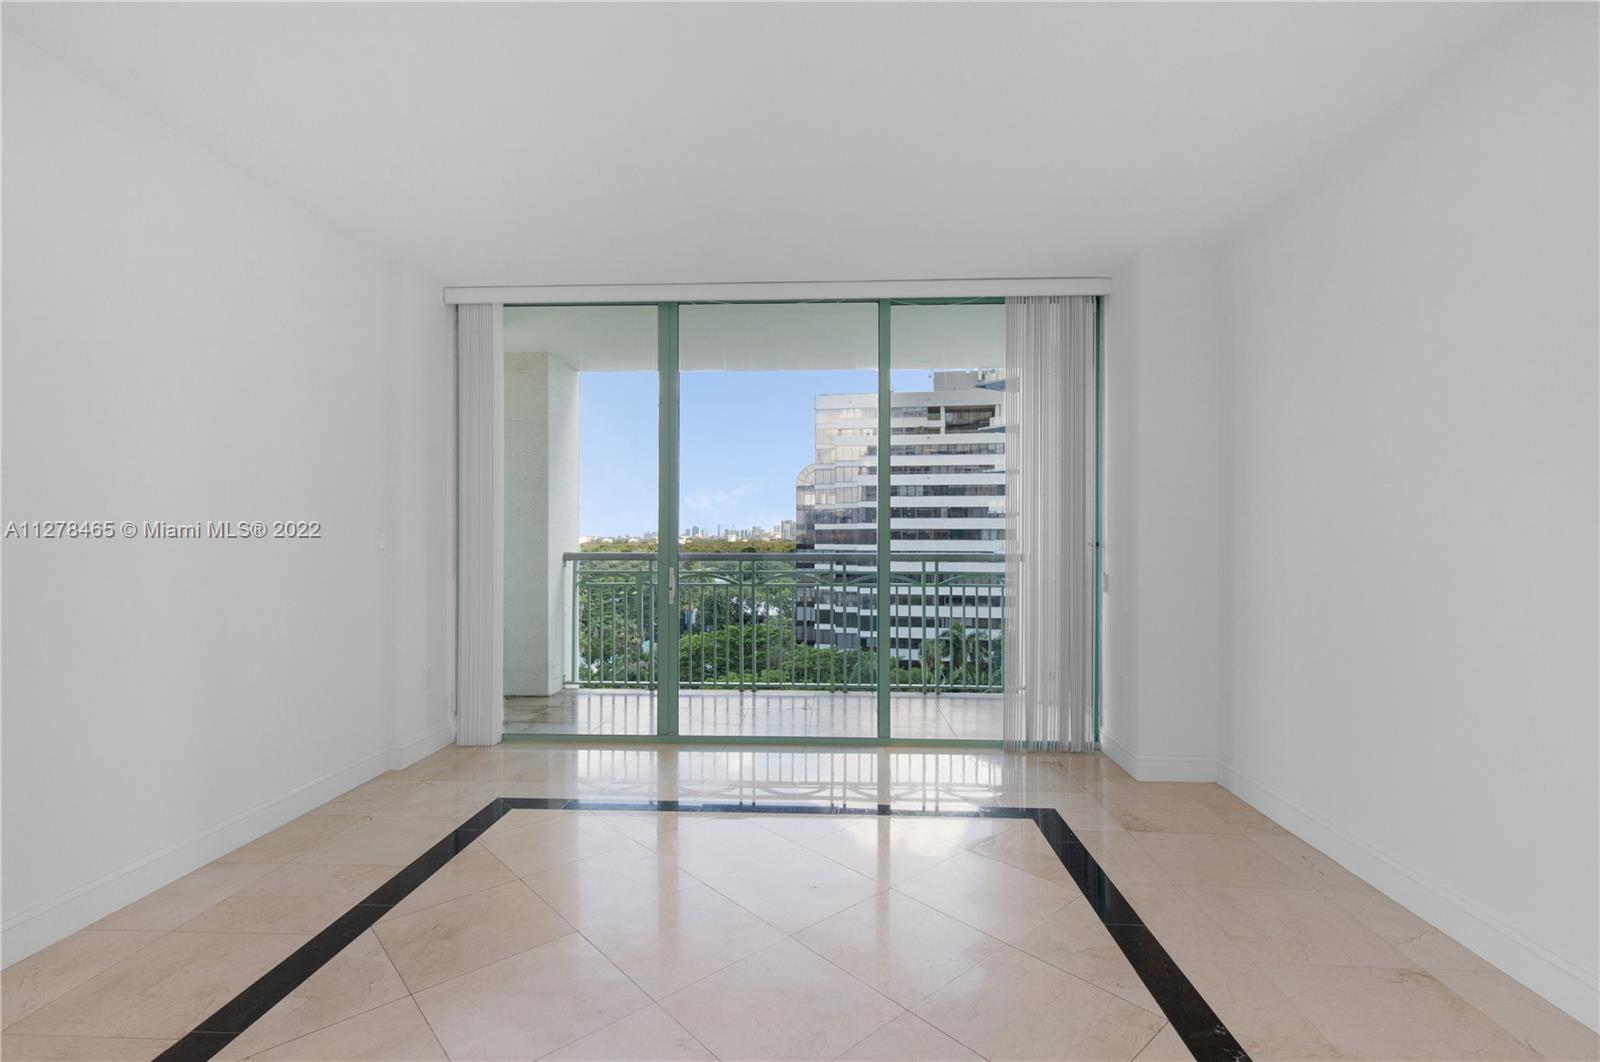 Unfurnished 1 bedroom residence with 1.5 baths at the Ritz-Carlton Coconut Grove. Beautiful water view from the
balcony. Marble flooring in the living room and bathrooms, carpet in the bedroom. Enjoy the Coconut Grove vibe
with parks, marina, restaurants and shopping nearby.